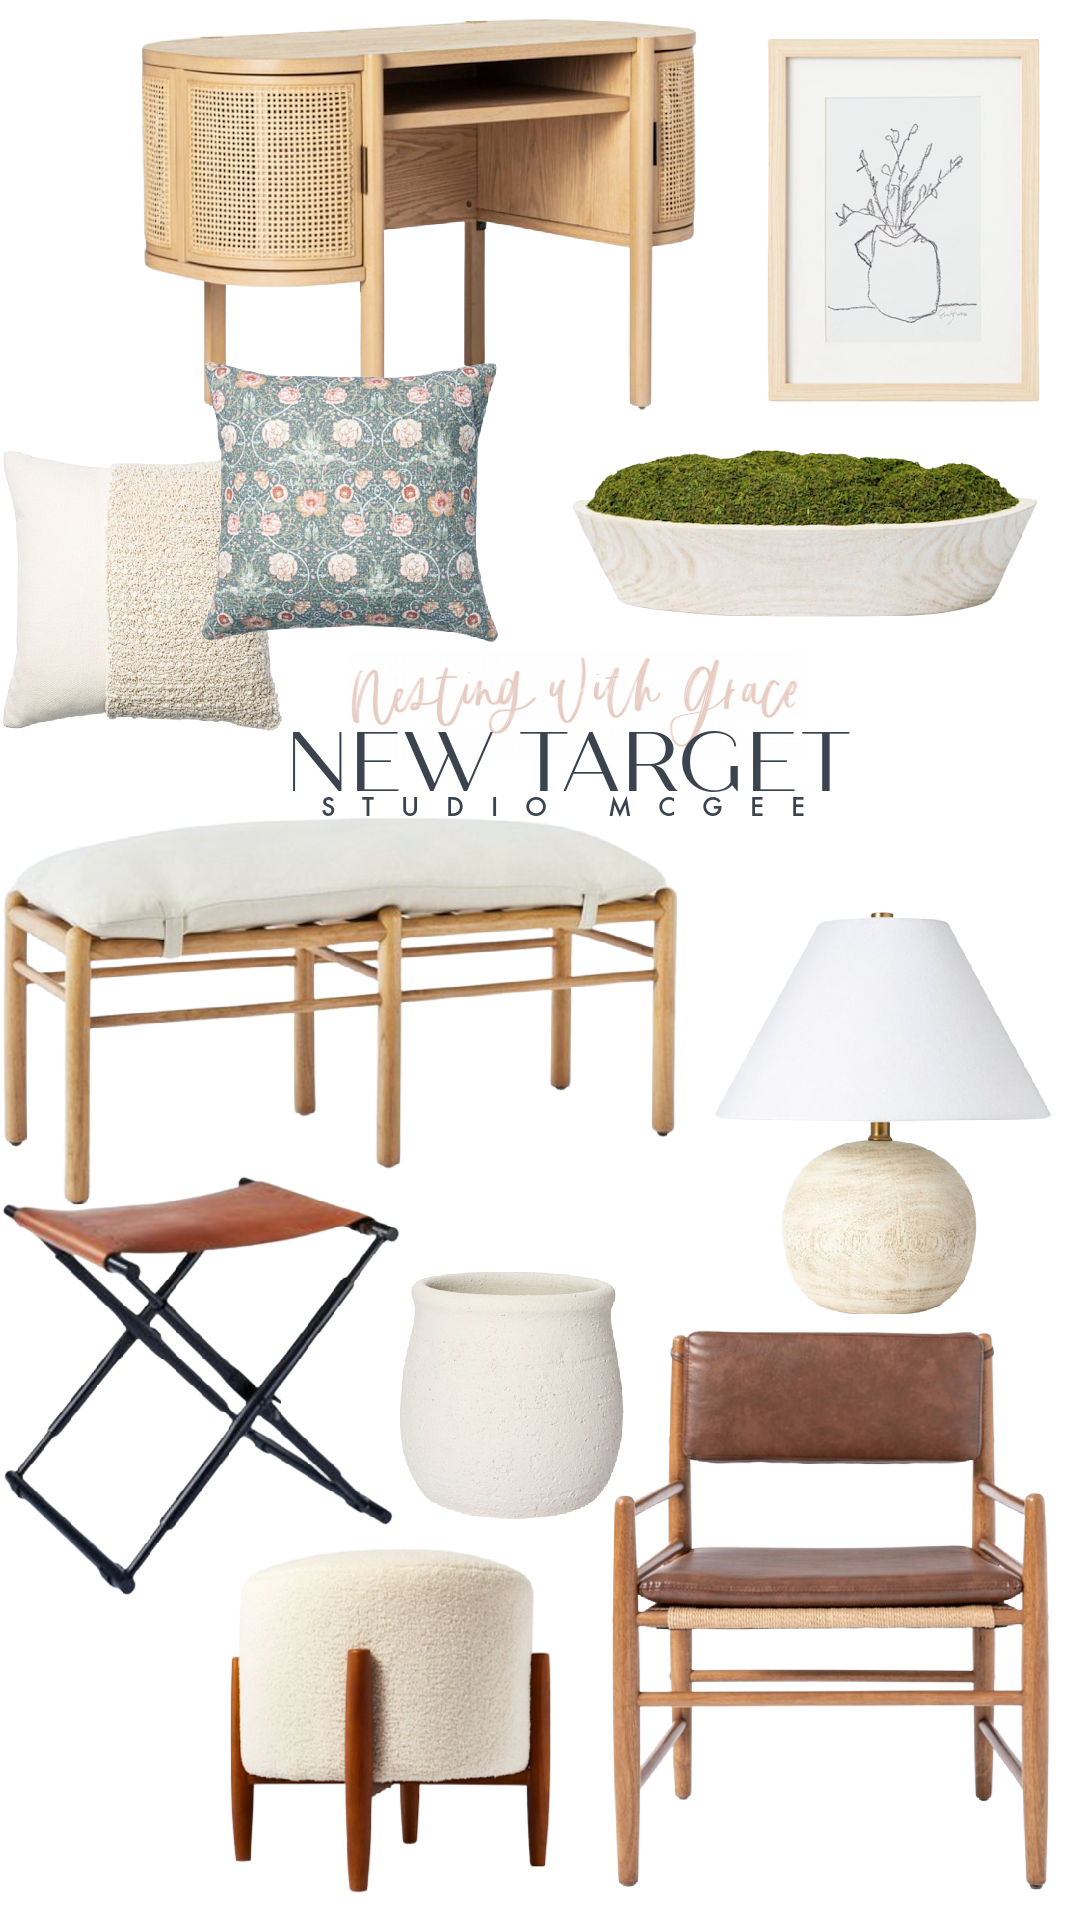 New Target Studio McGee Collection